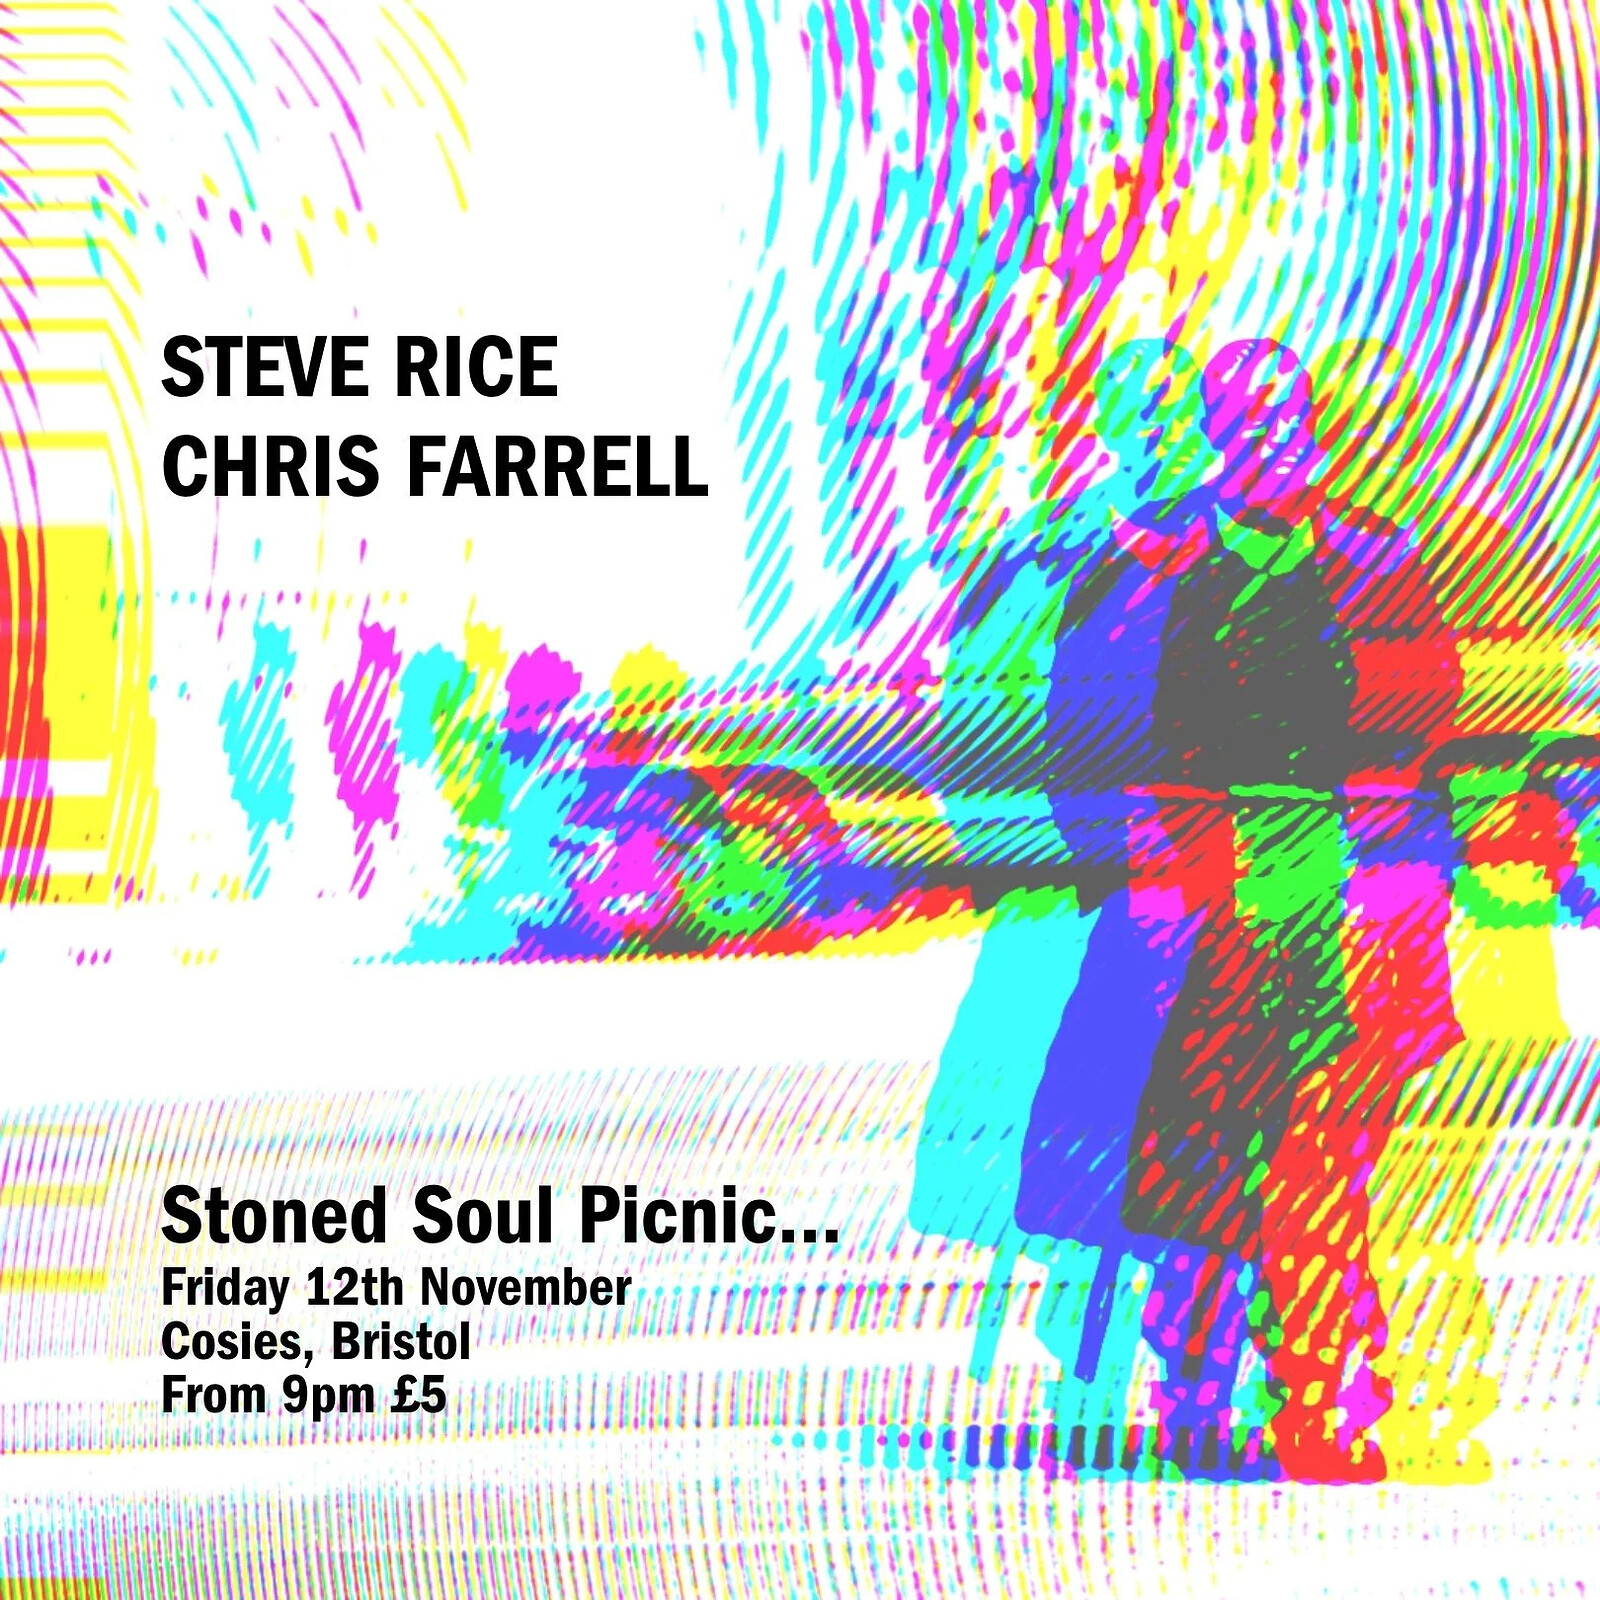 Stoned Soul Picnic w/ Steve Rice & Chris Farrell at Cosies